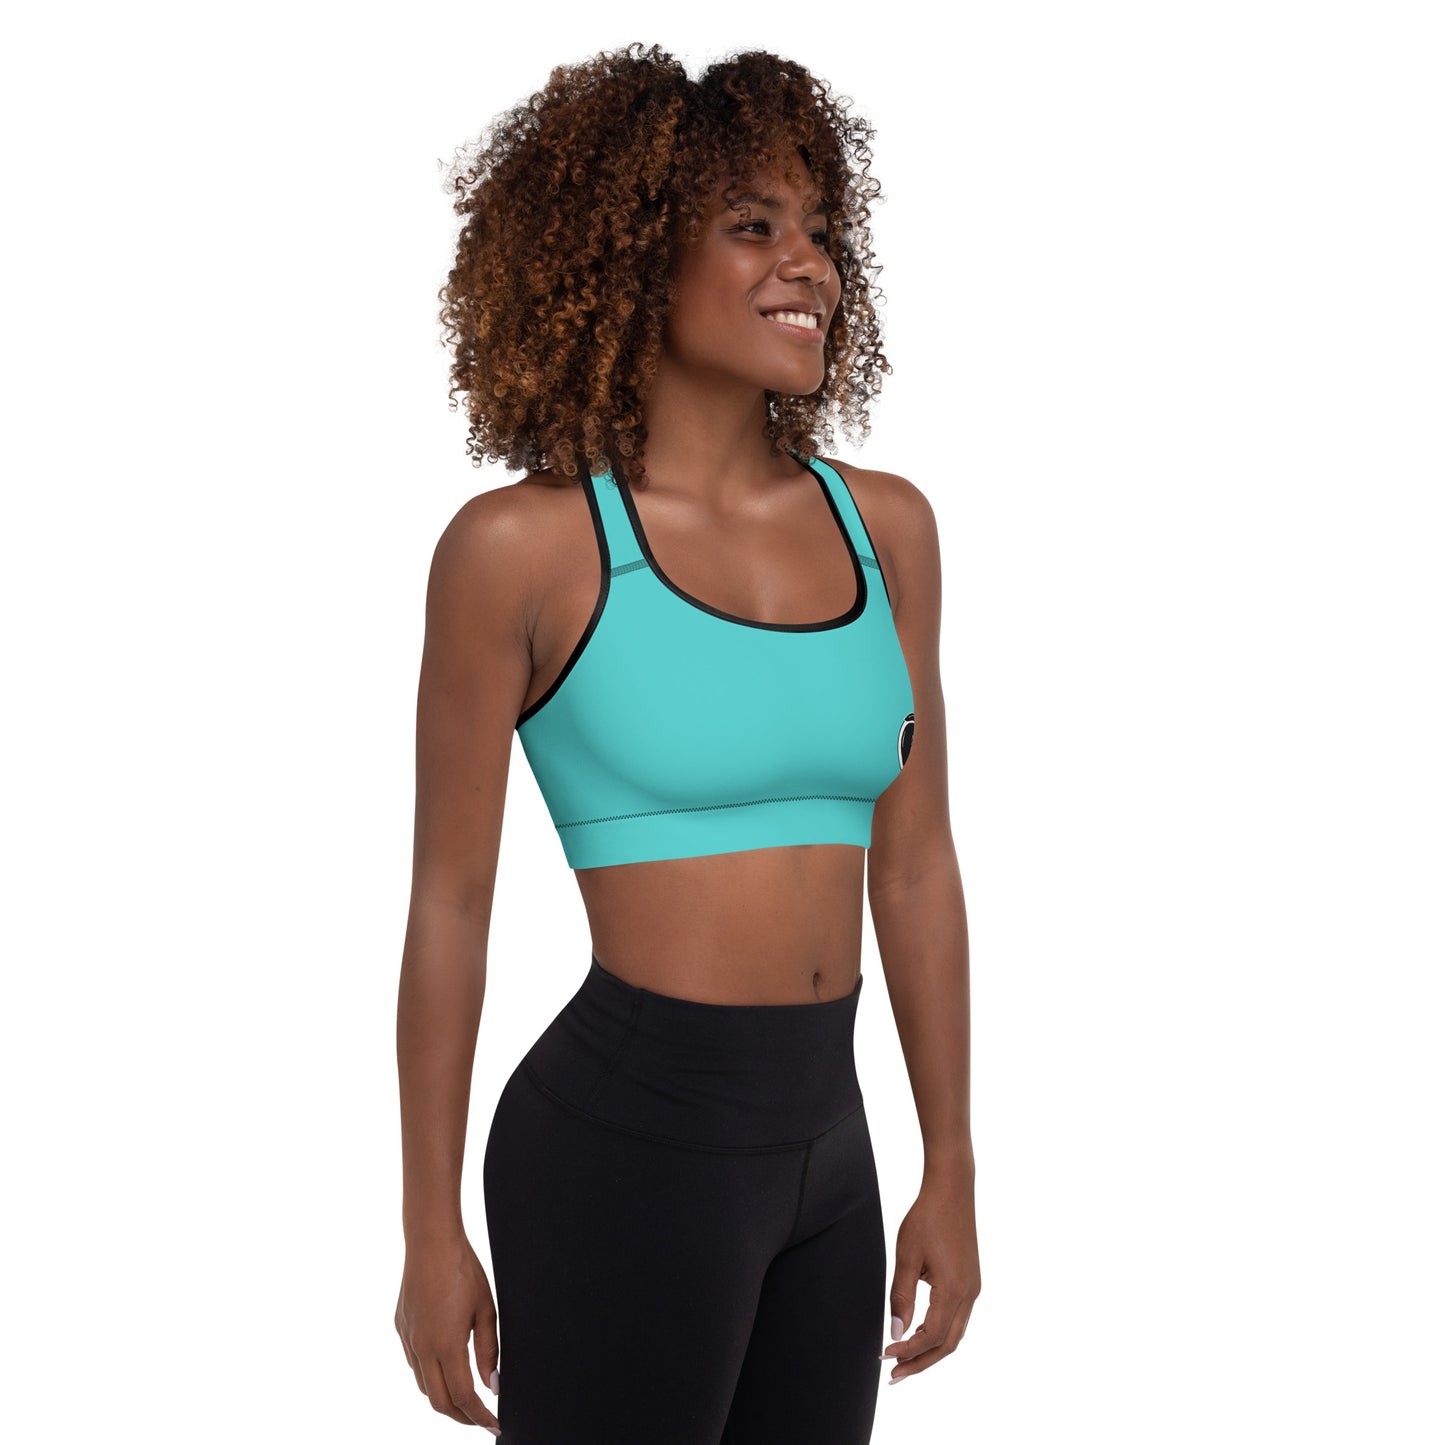 Queen of Peaches Padded Sports Bra